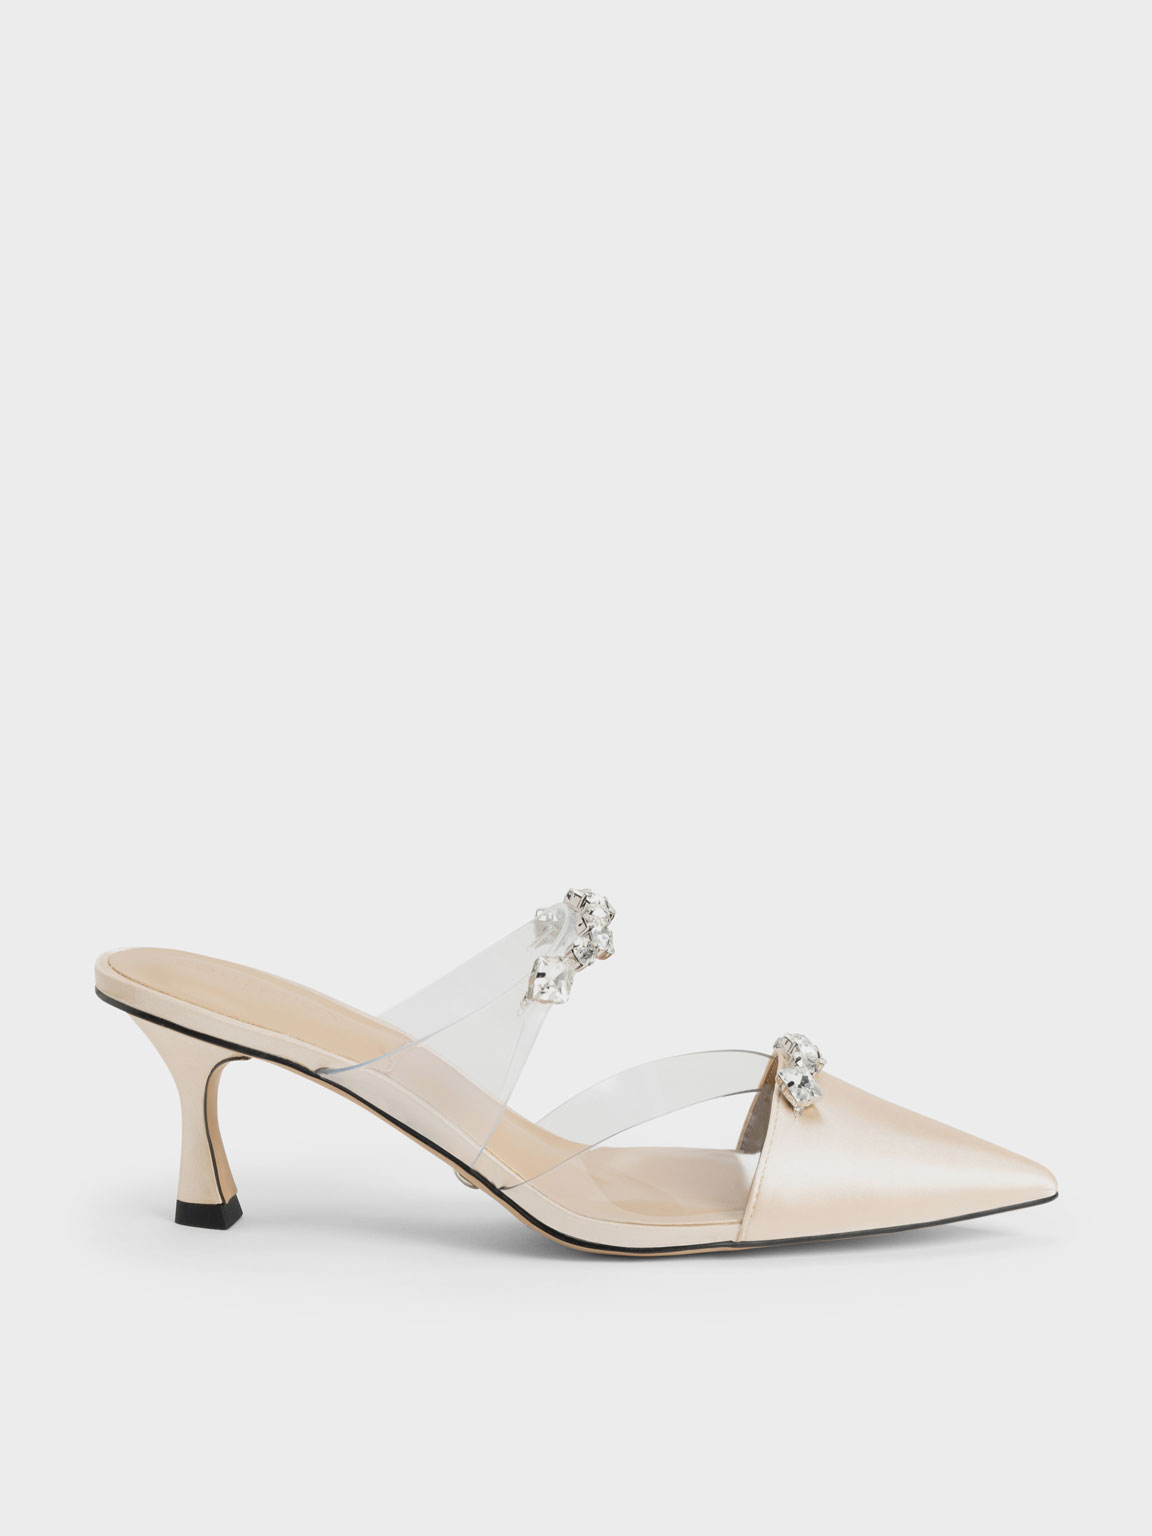 Charles & Keith - Women's Pearl Embellished Flat Mules, White, US 7